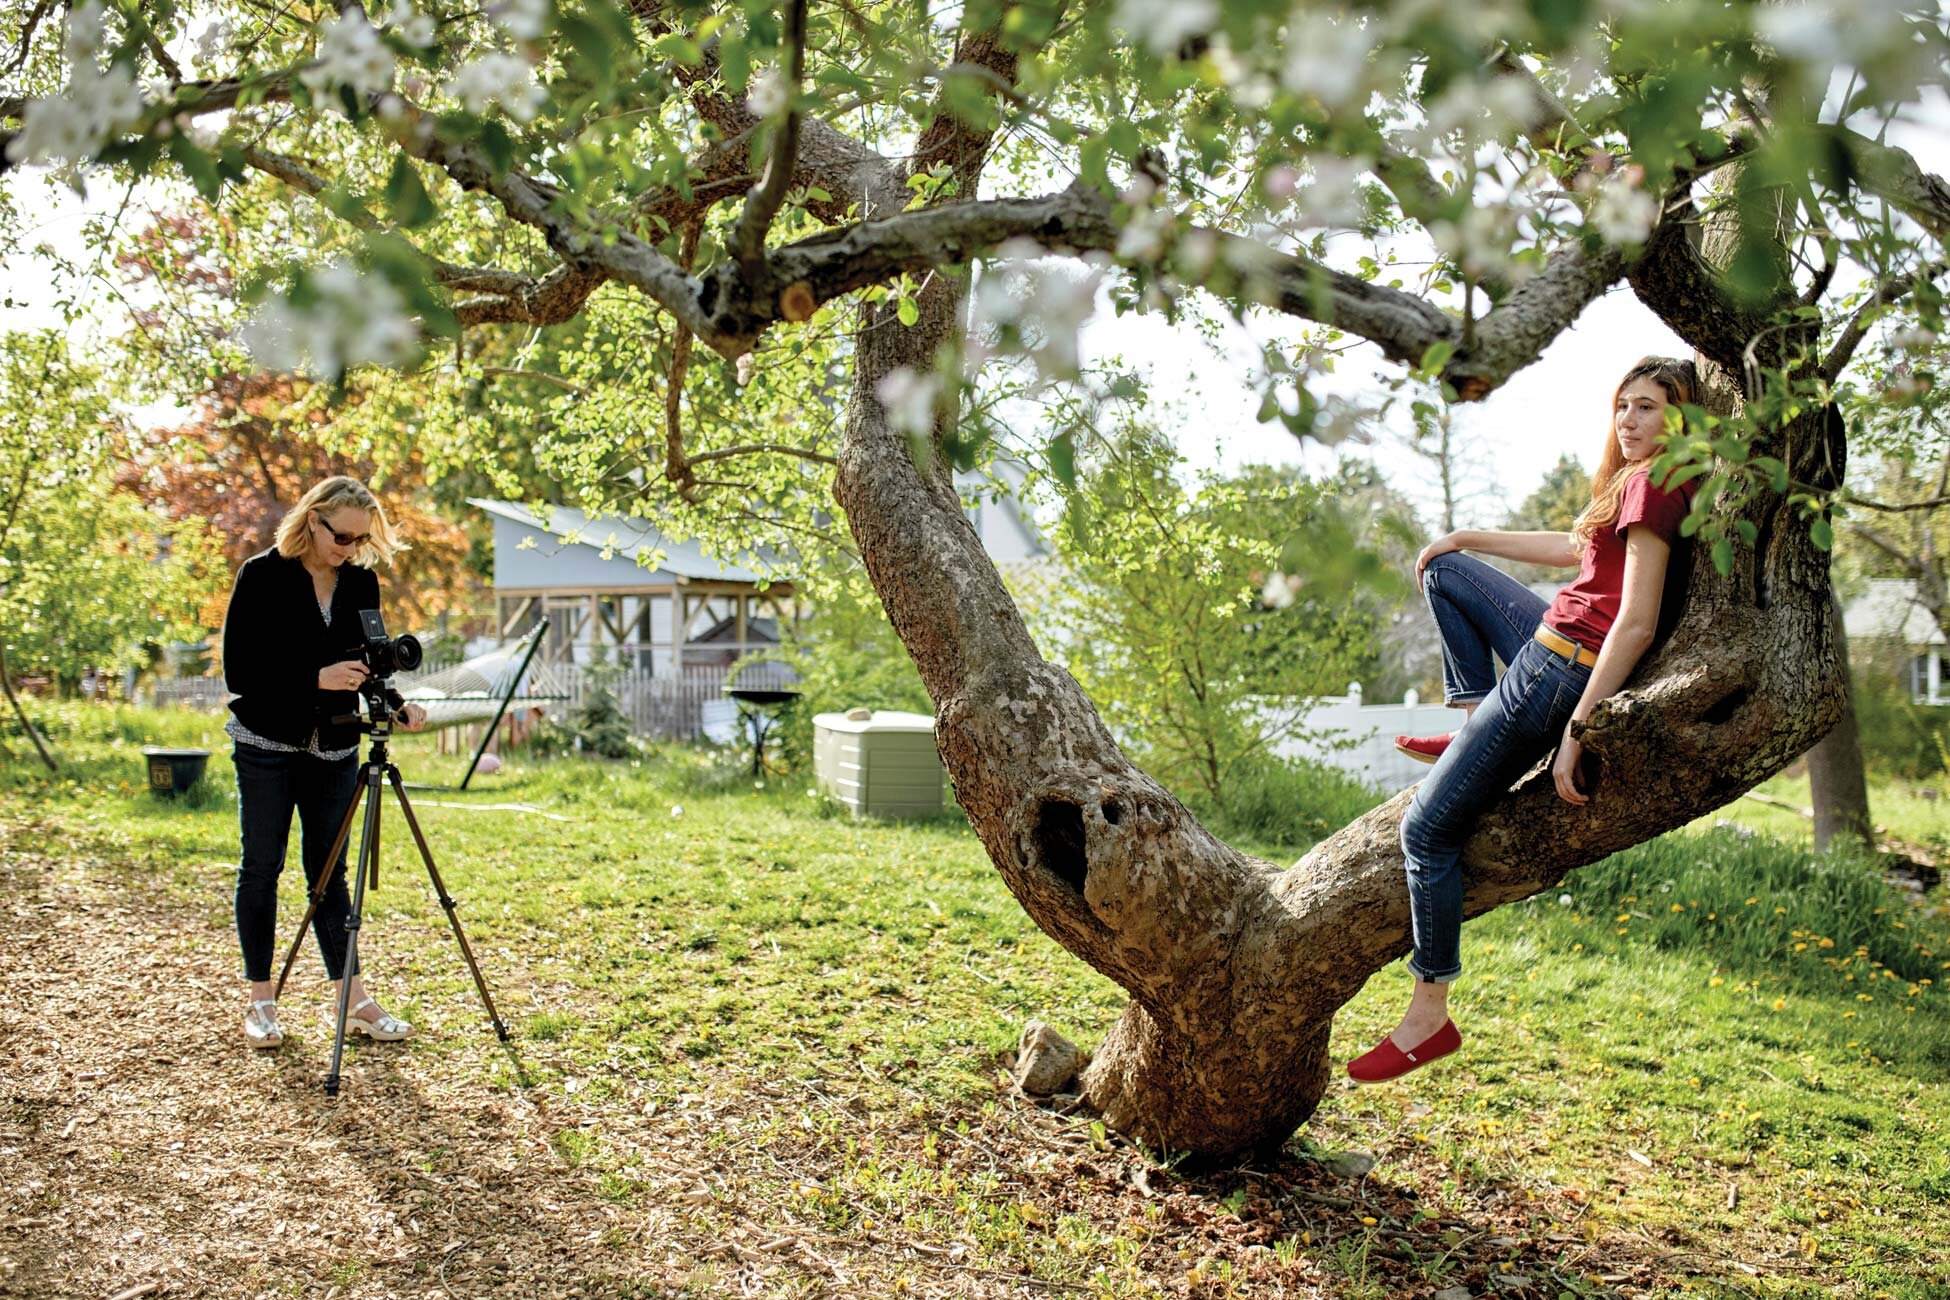 Jocelyn photographs Pearl in the Grandmother apple tree, a common and beloved subject.